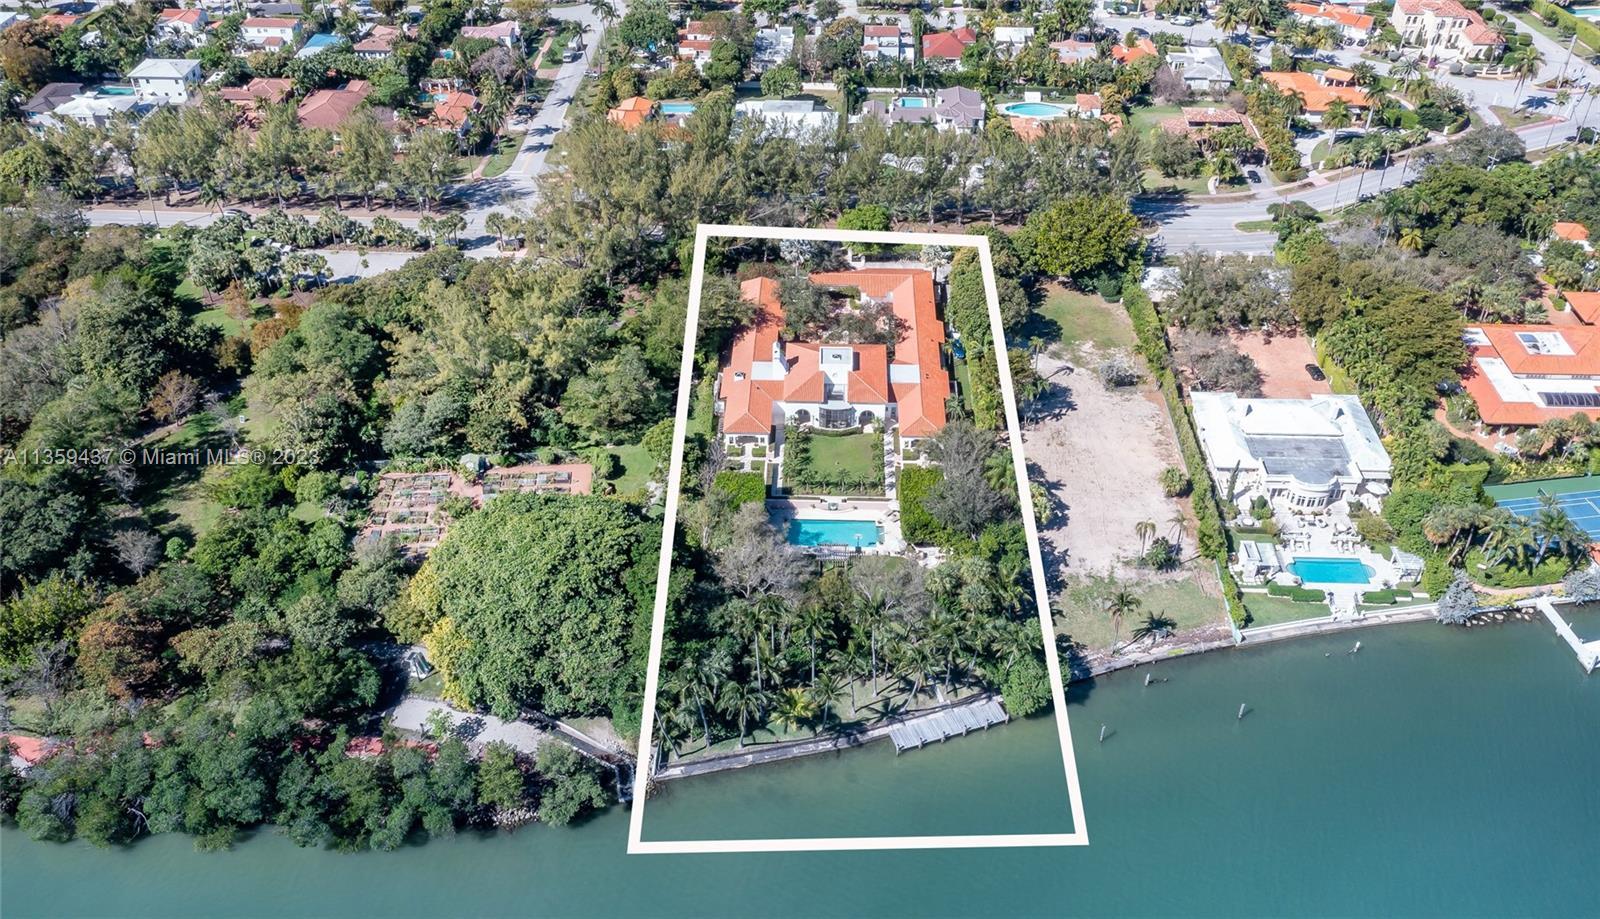 Nestled on a sprawling 1.3-acre waterfront lot, this magnificent Miami Beach property offers endless